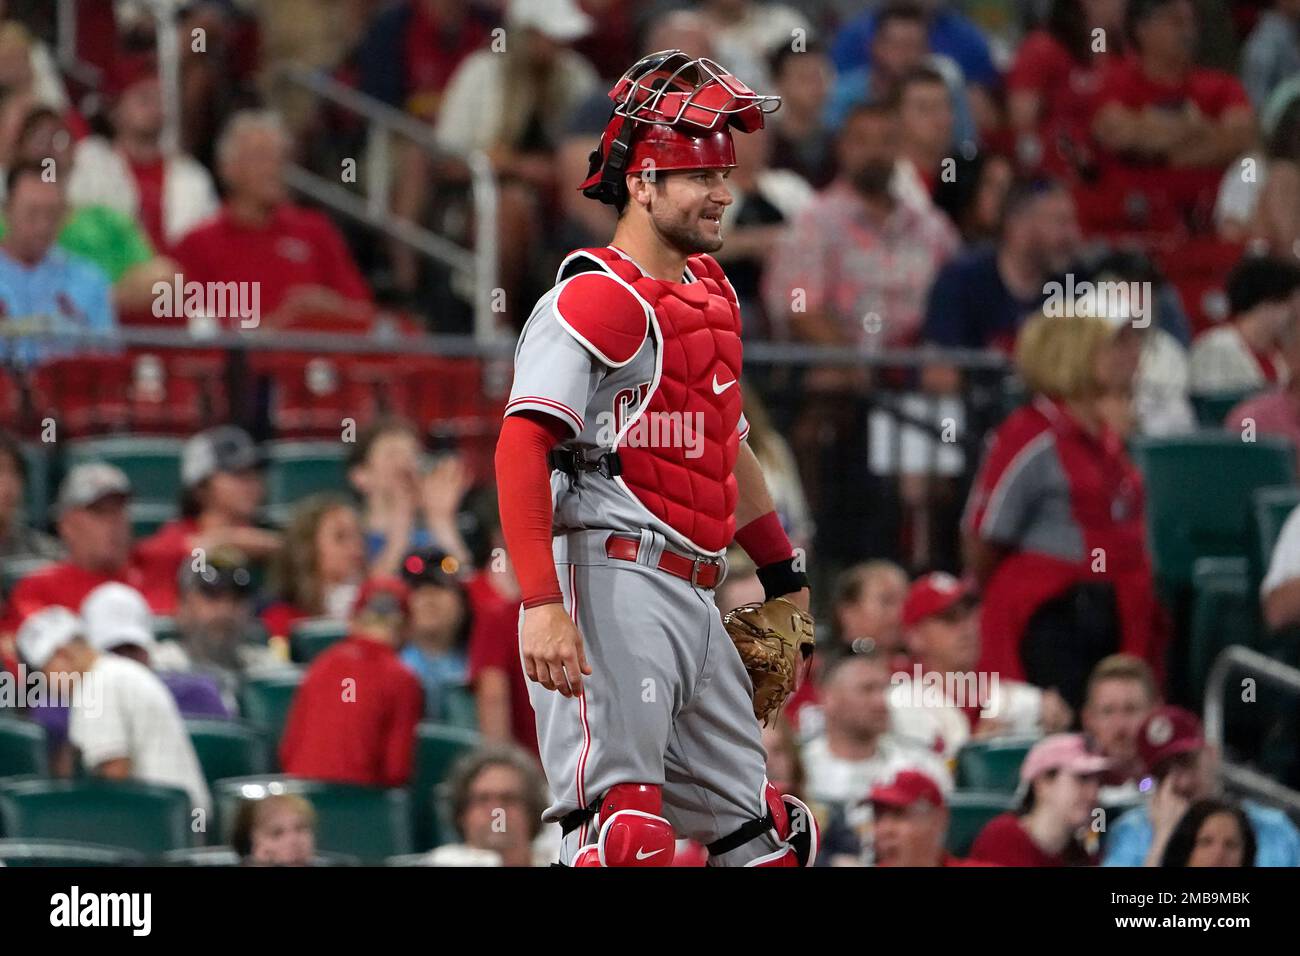 Cincinnati Reds catcher Chris Okey takes up his position during the eighth inning of a baseball game against the St. Louis Cardinals Friday, June 10, 2022, in St